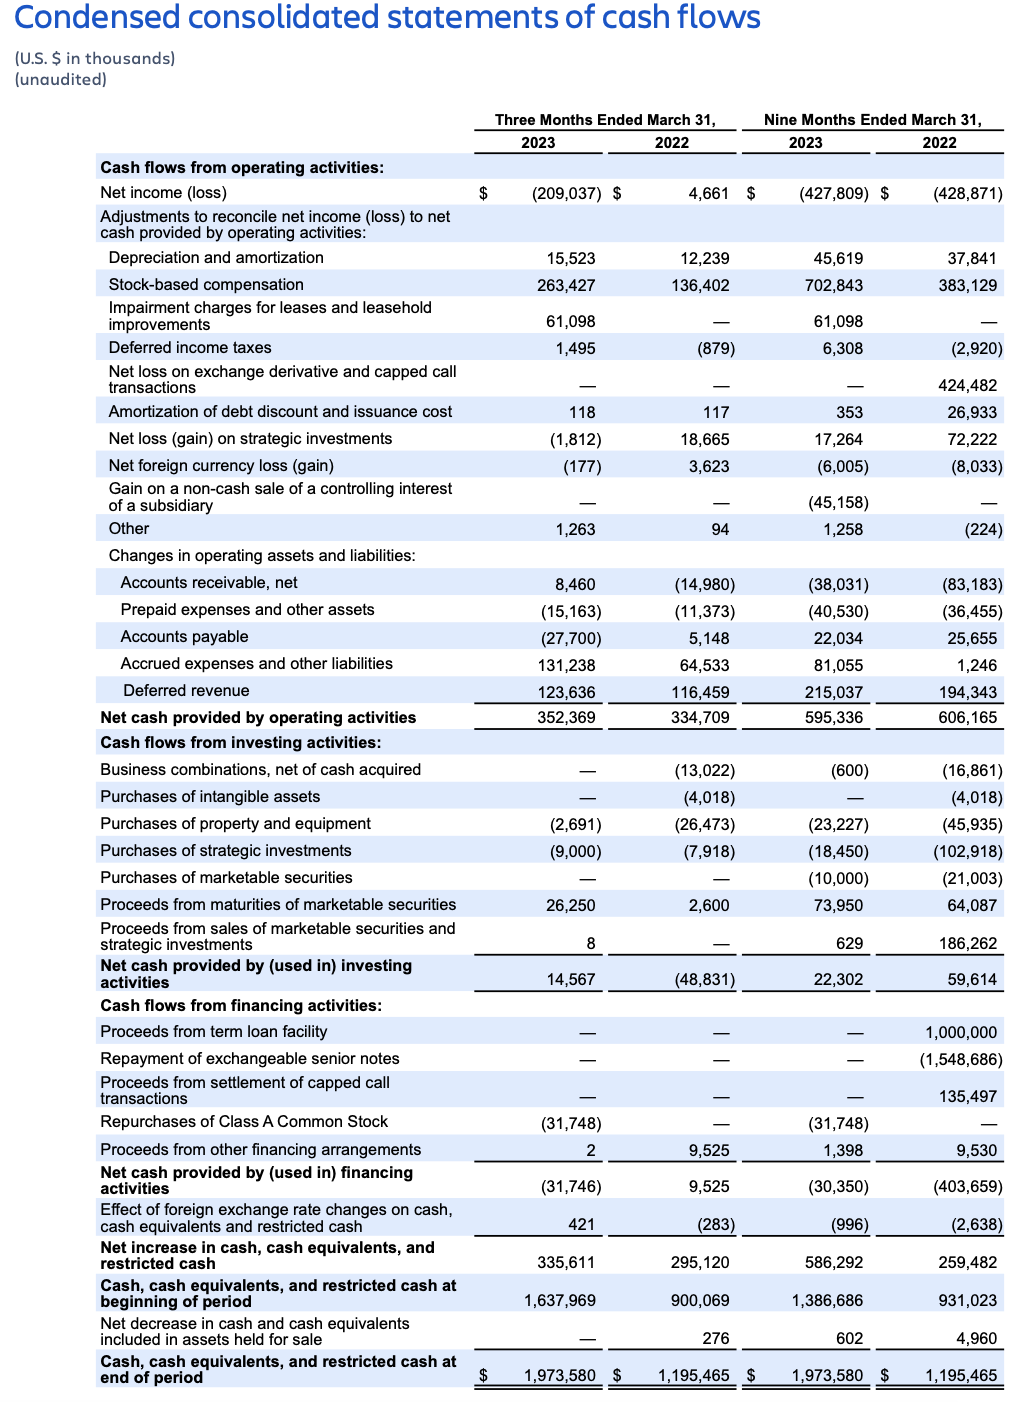 Atlassian earnings Q3 FY23 – condensed consolidated statement of cash flows